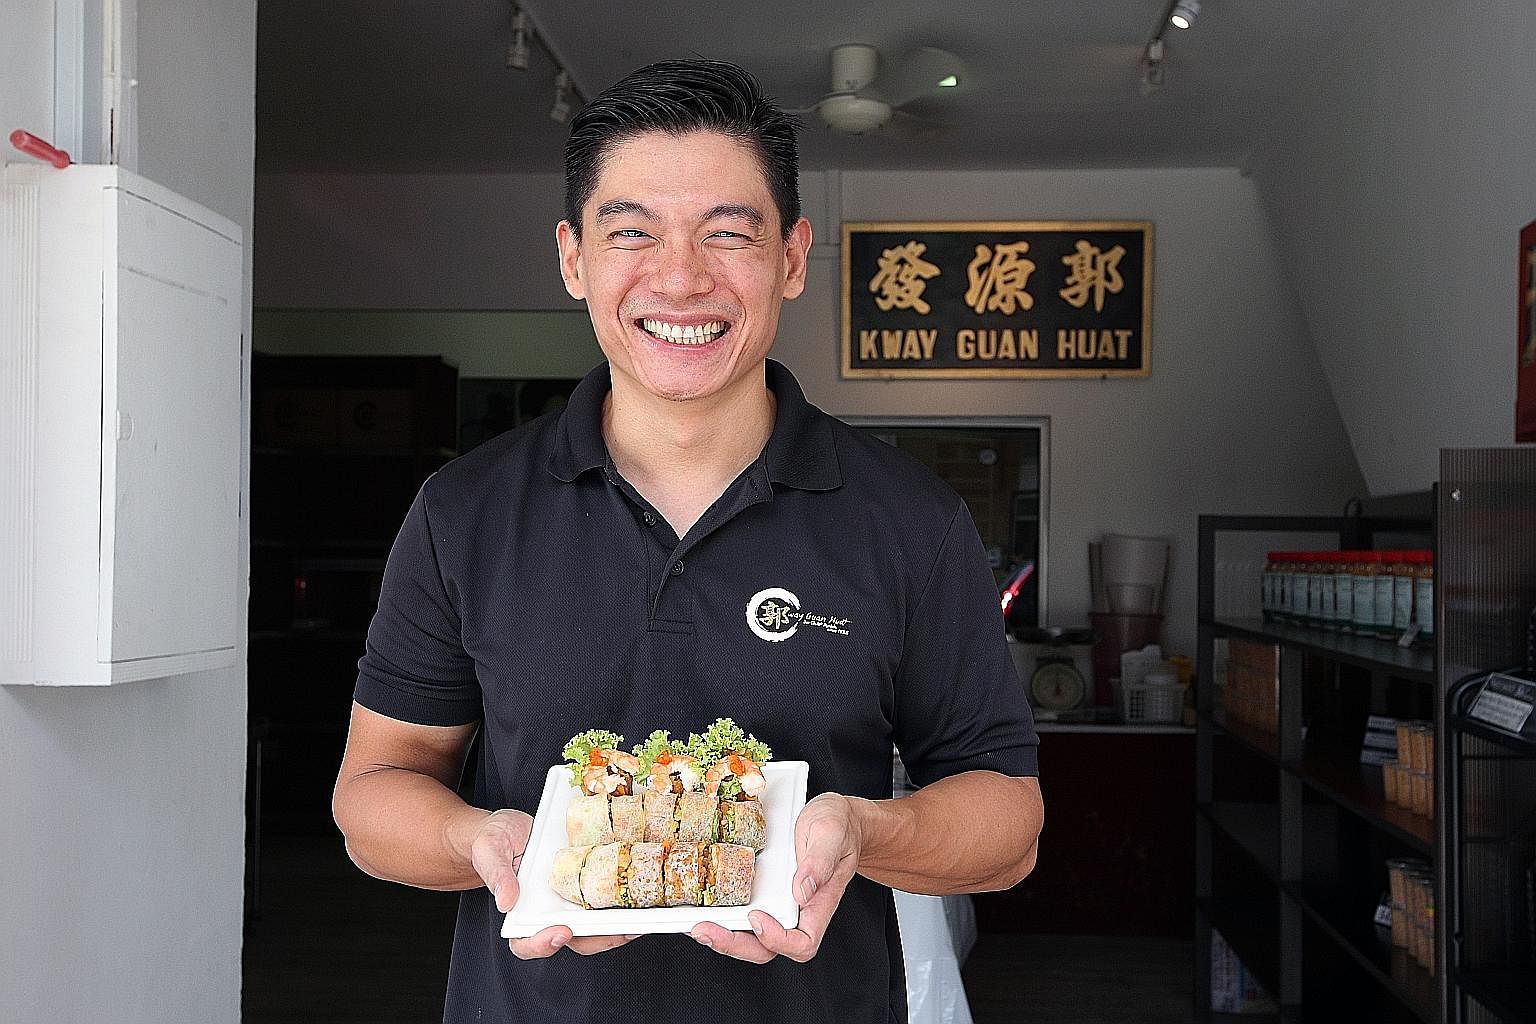 Kway Guan Huat Joo Chiat Popiah owner Michael Ker took a pay cut in taking over the family business.